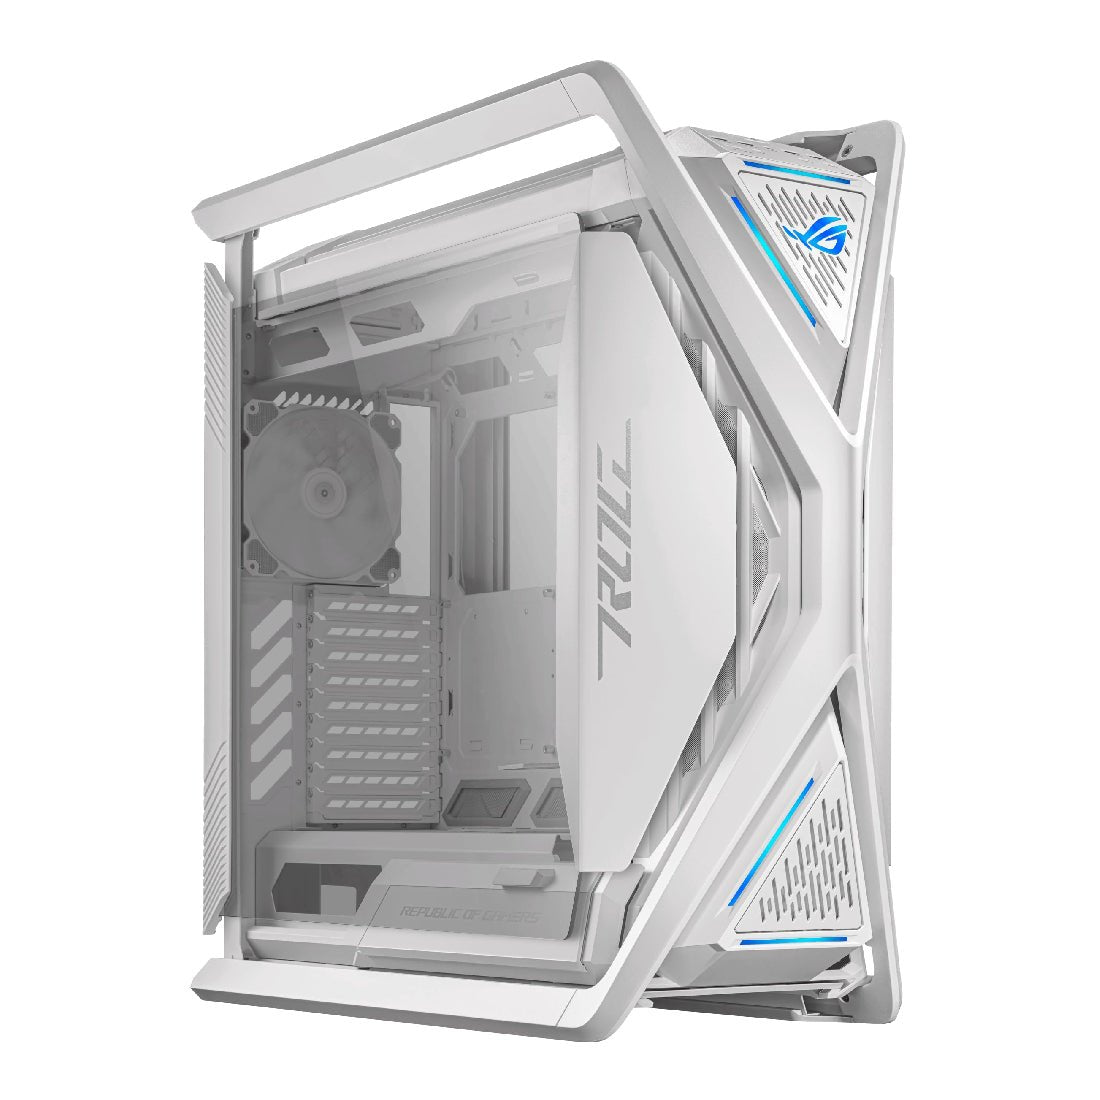 Asus ROG Hyperion GR701 E-ATX Tower Chassis - White Edition - صندوق - Store 974 | ستور ٩٧٤